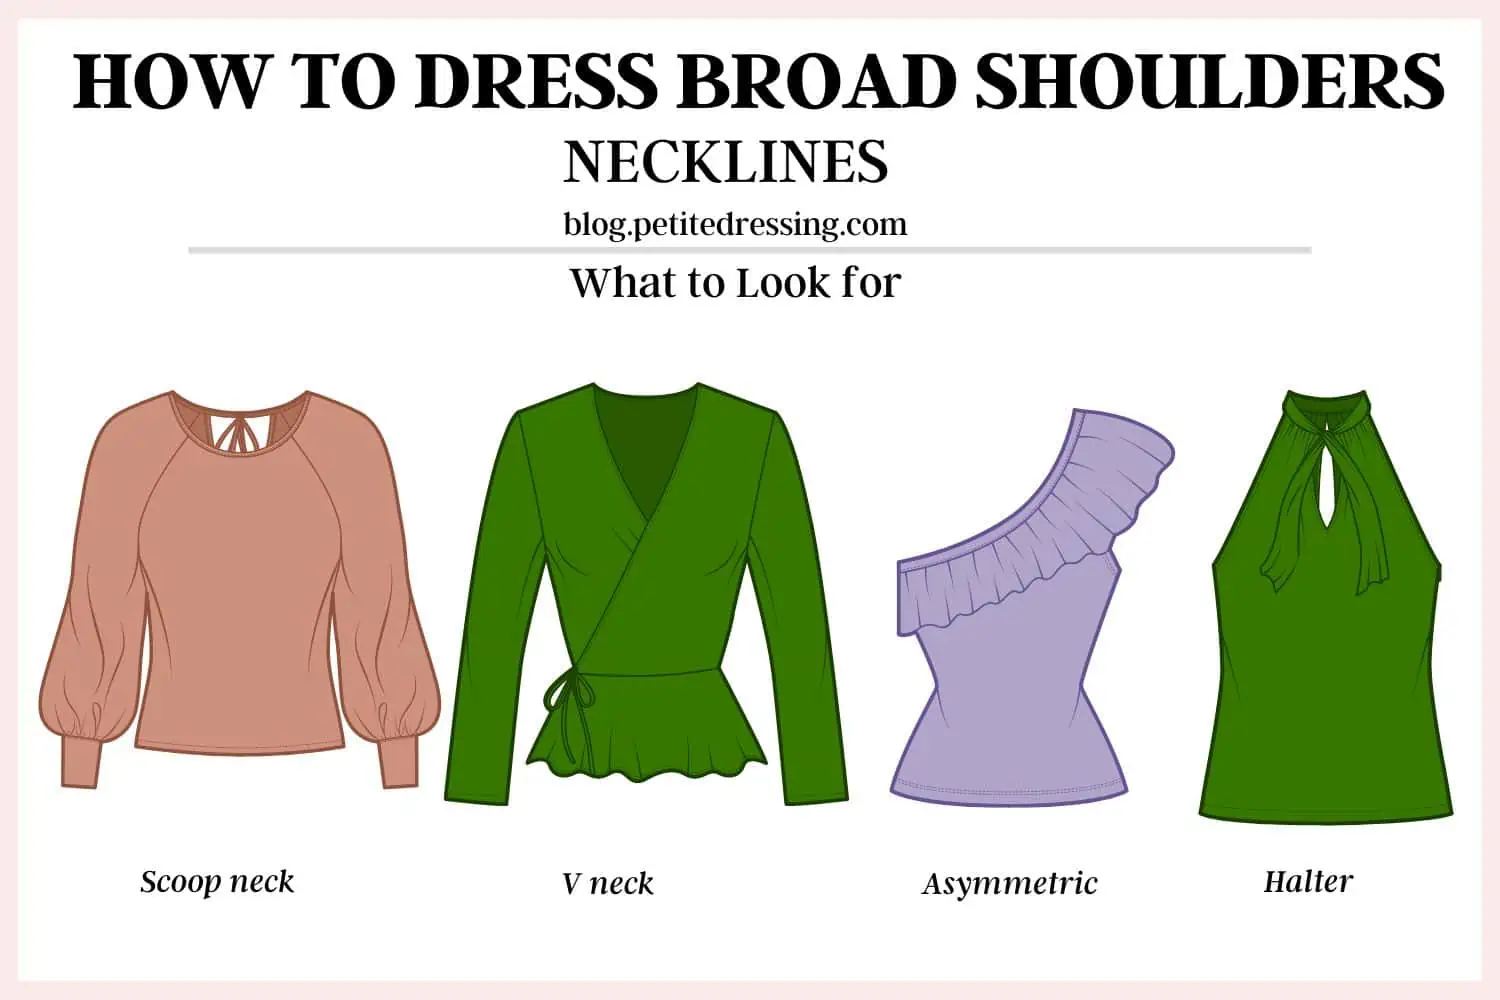 How to Dress Broad Shoulders: the Ultimate Guide - Petite Dressing   Dresses for broad shoulders, Necklines for dresses, Broad shoulders